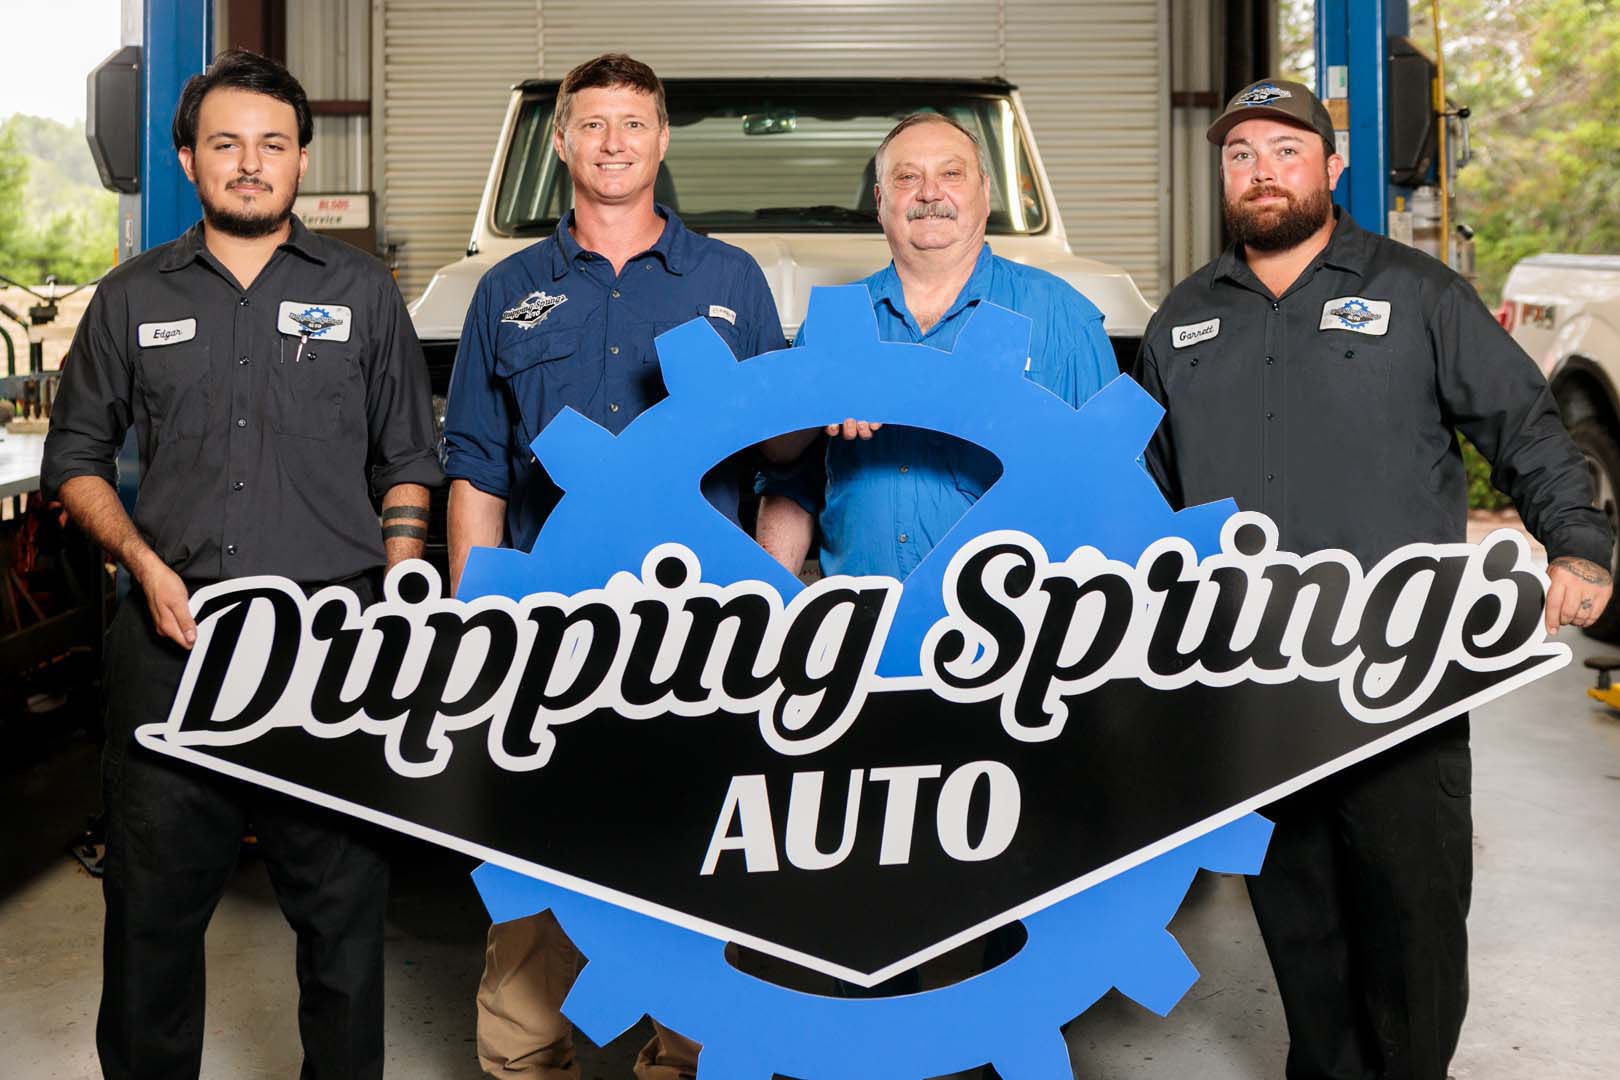 The Crew | Dripping Springs Automotive